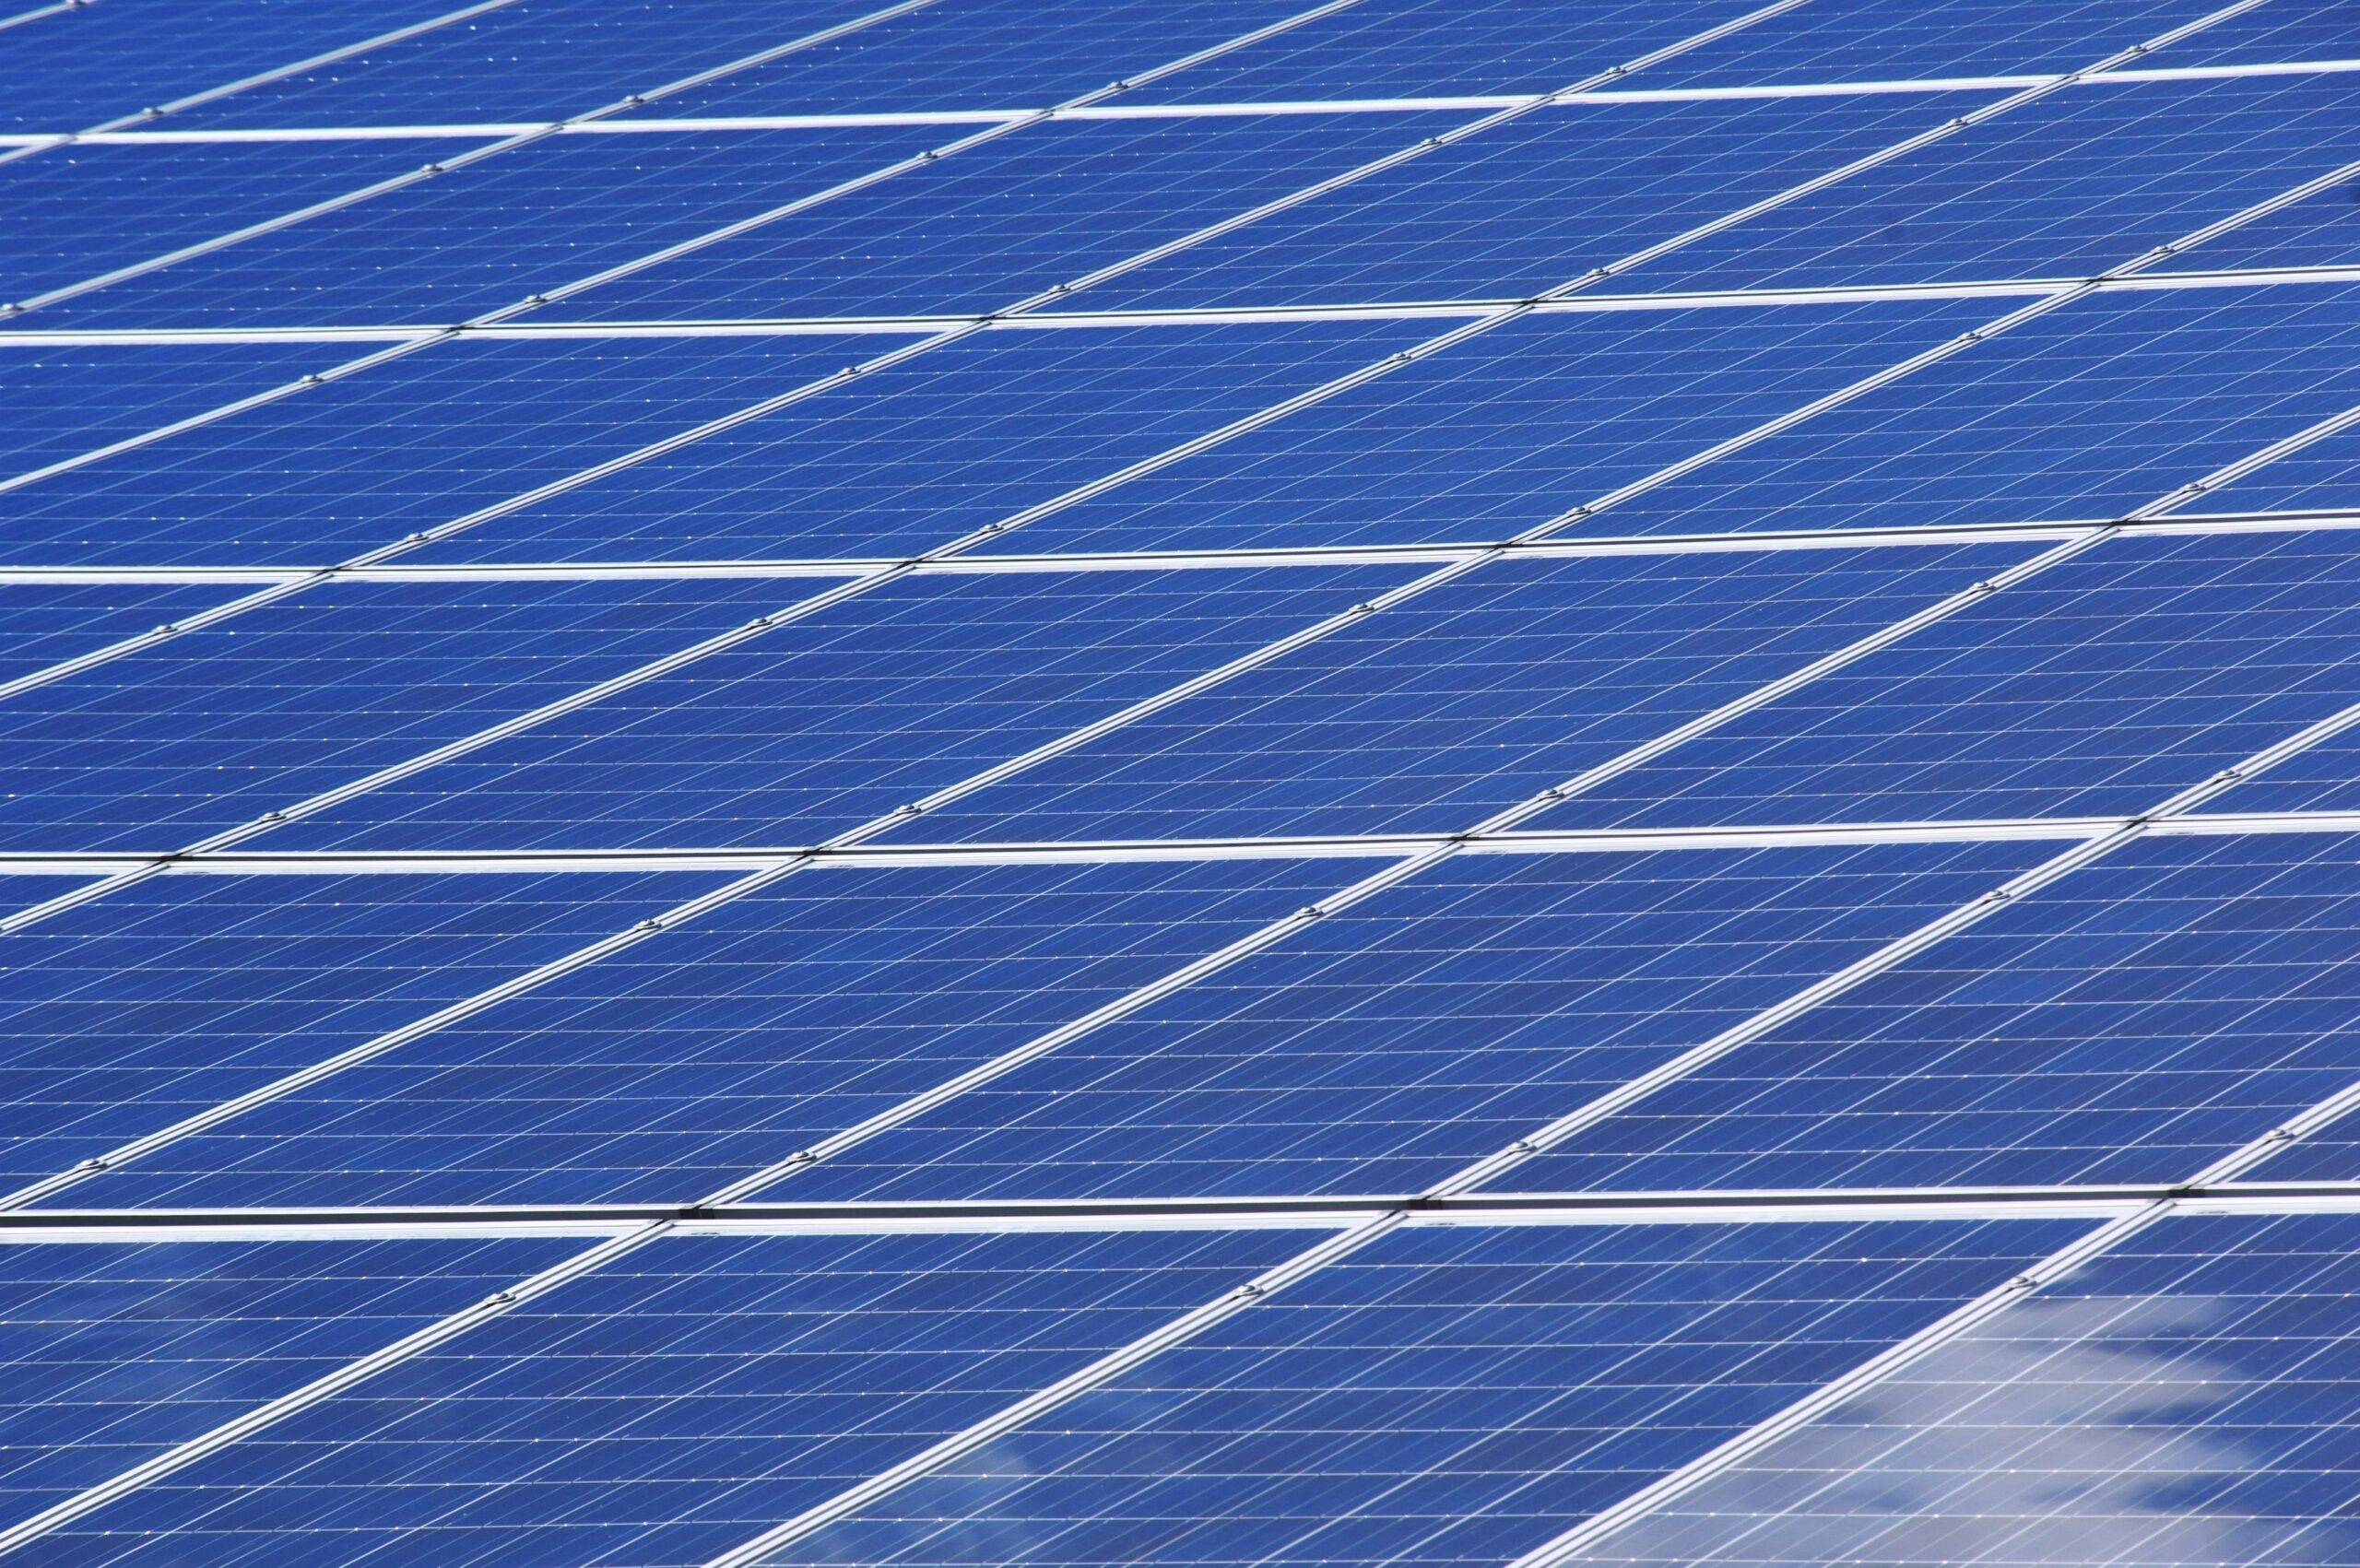 Close-up of a solar panel in a community array, showing the textured surface of individual photovoltaic cells.